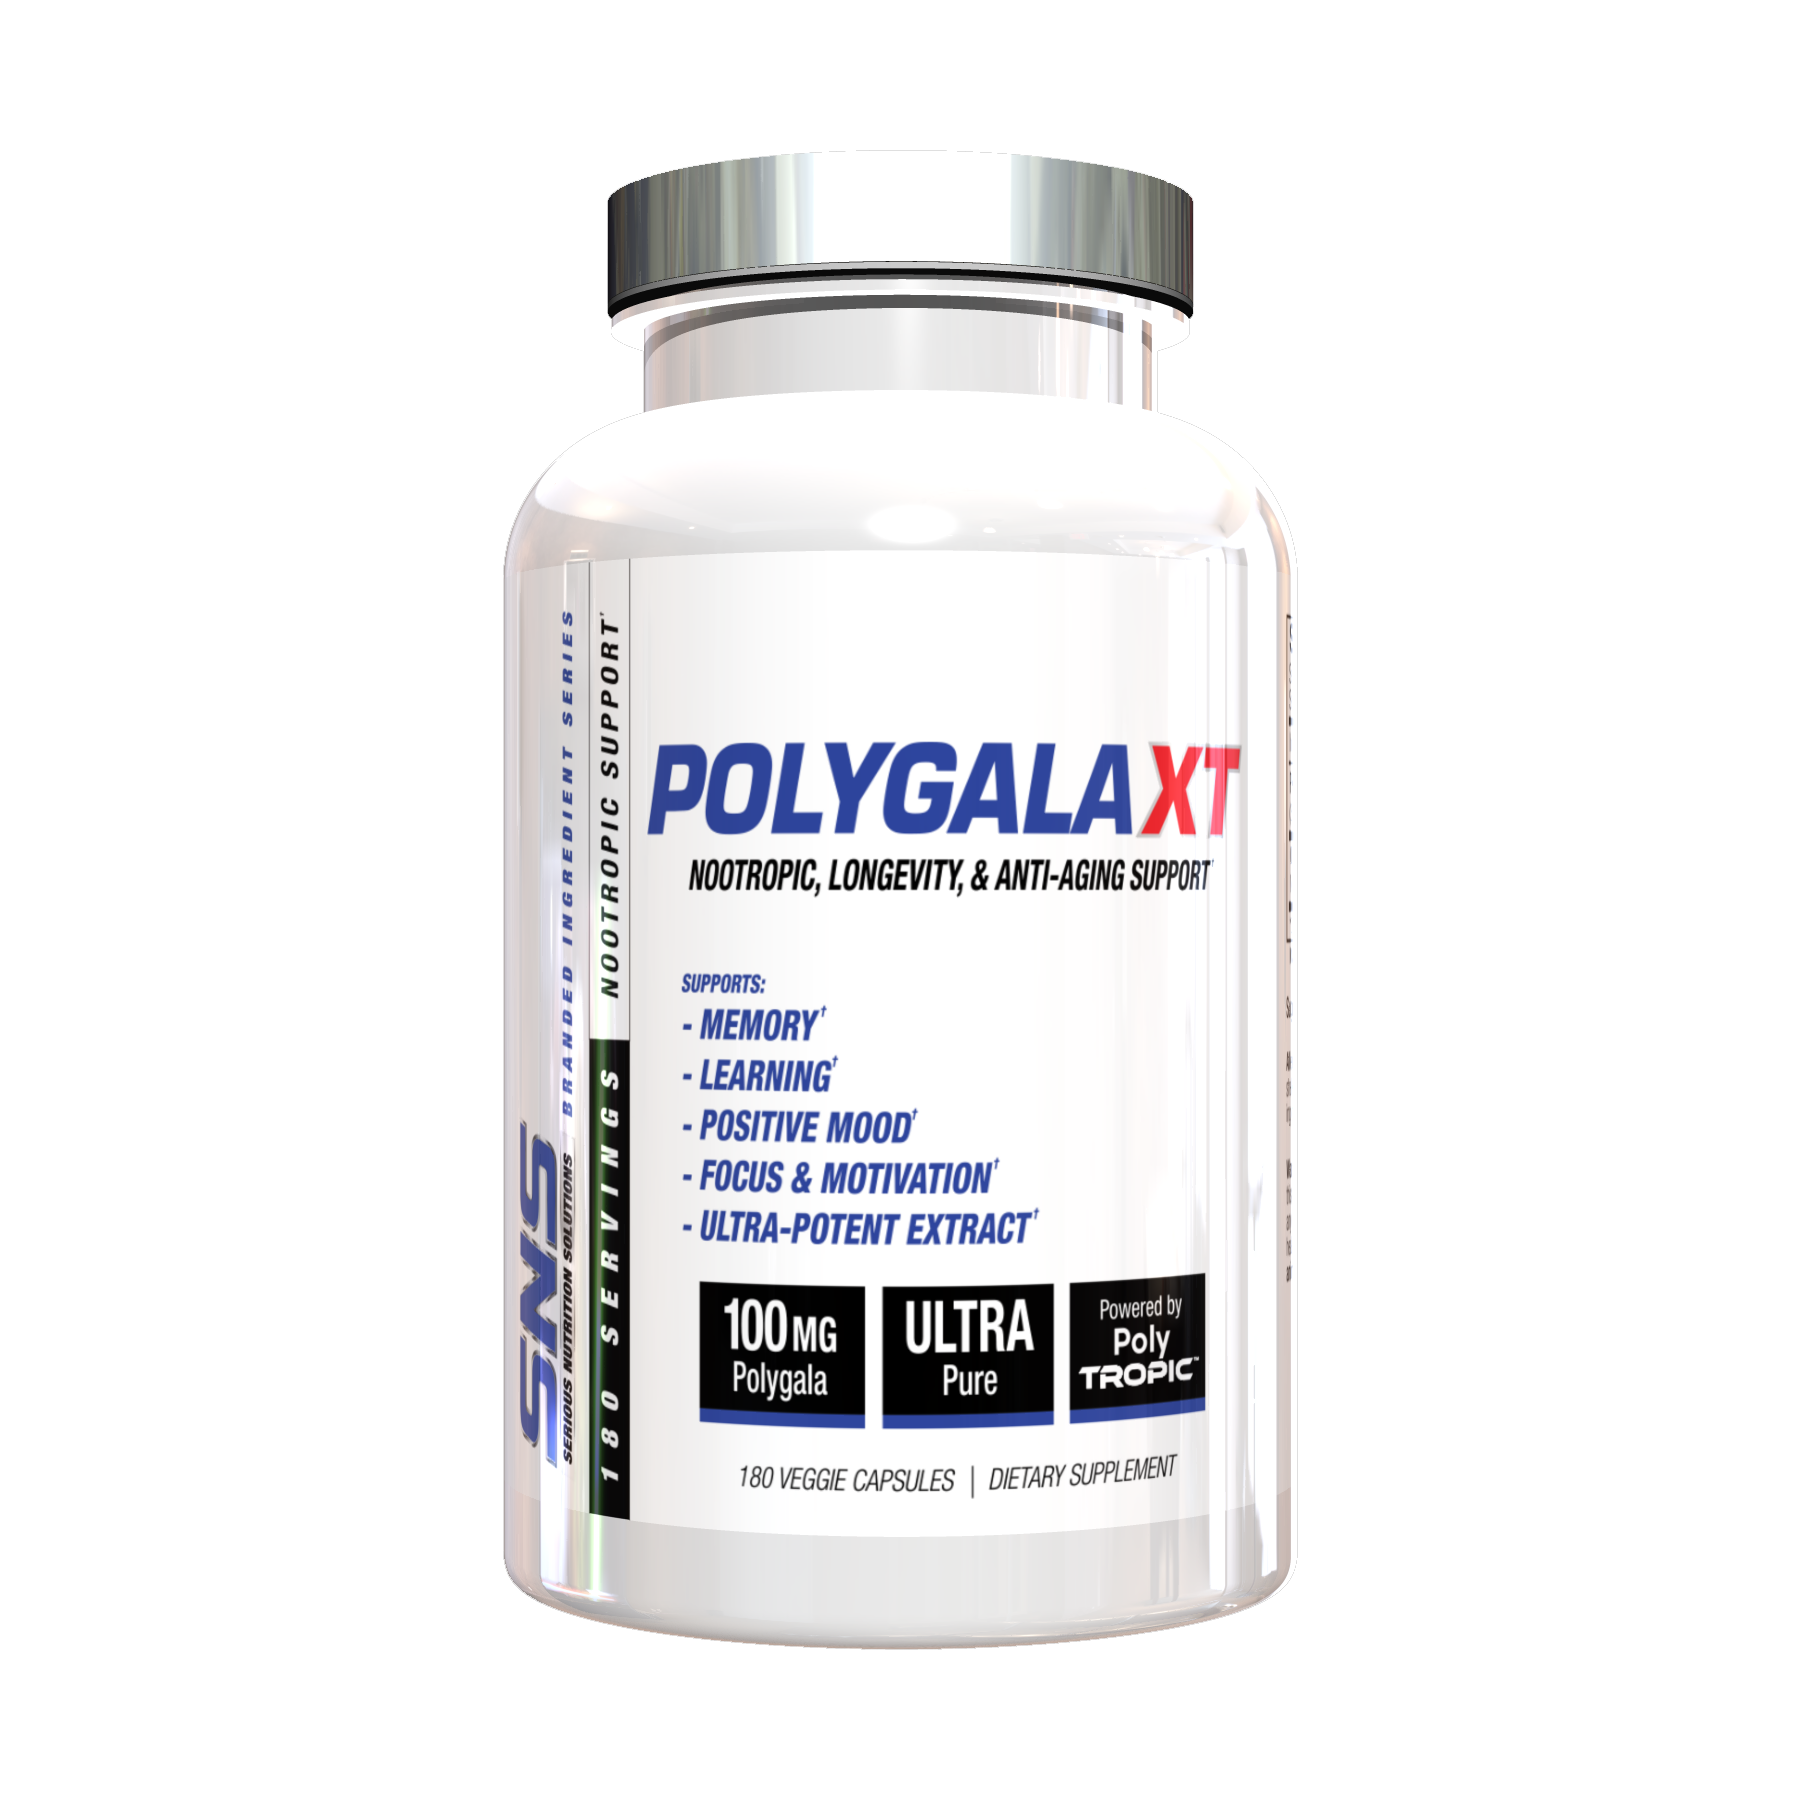 Polygala XT front of the bottle